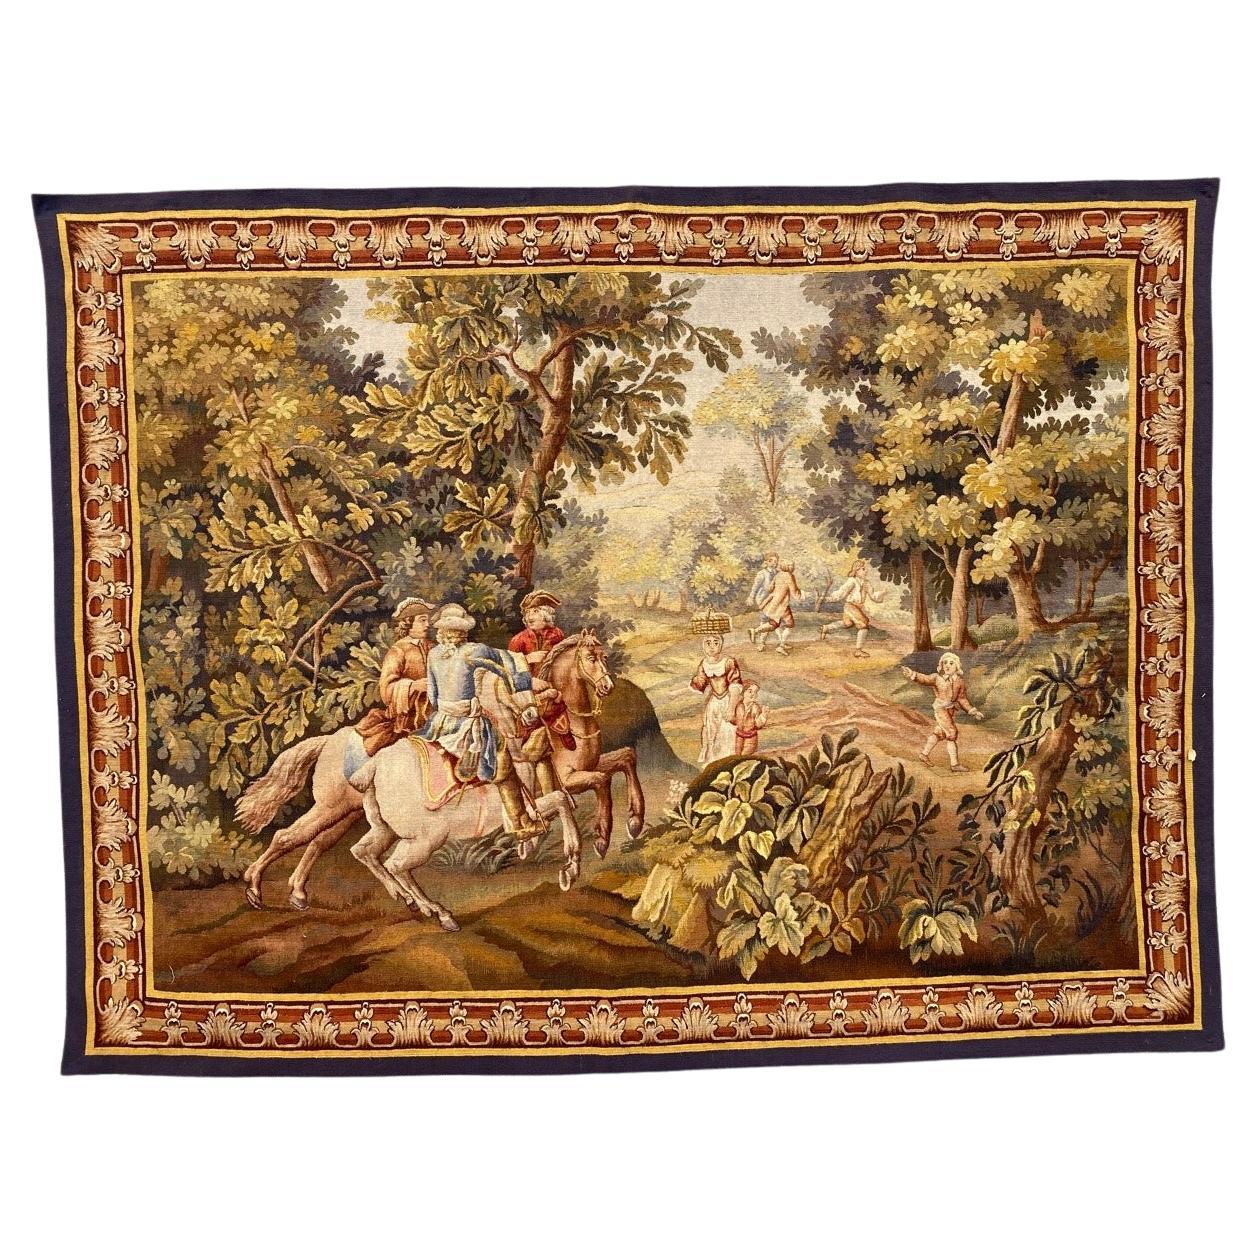 Bobyrug’s Wonderful Fine Antique French Aubusson Tapestry For Sale